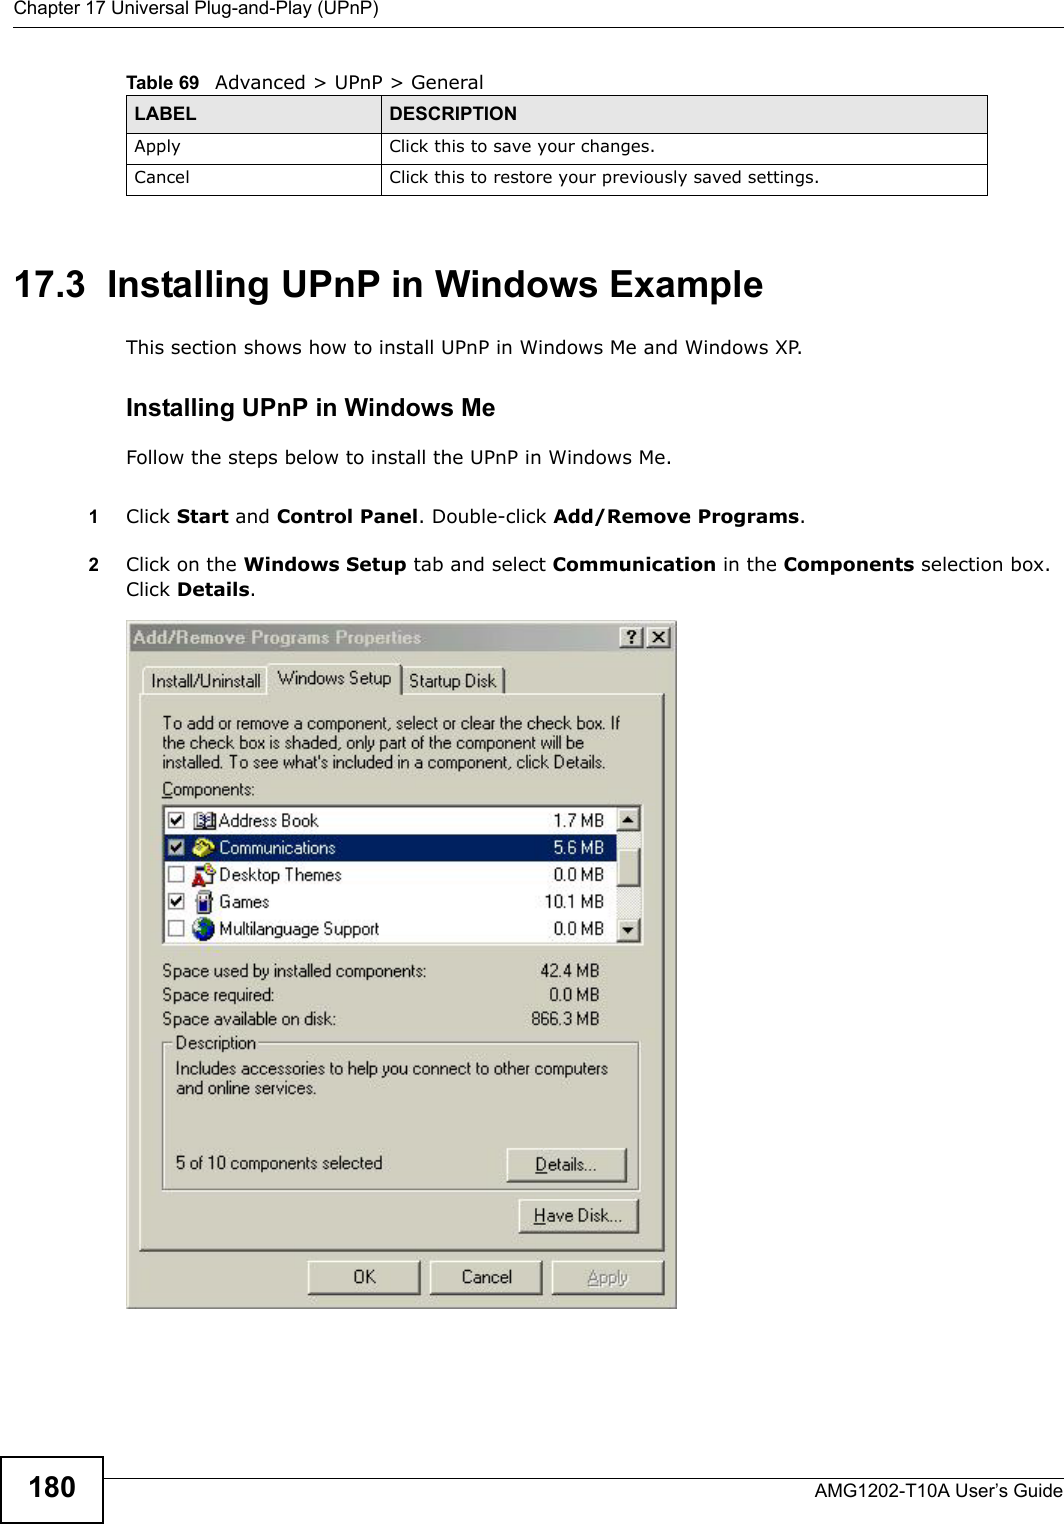 Chapter 17 Universal Plug-and-Play (UPnP)AMG1202-T10A User’s Guide18017.3  Installing UPnP in Windows ExampleThis section shows how to install UPnP in Windows Me and Windows XP. Installing UPnP in Windows MeFollow the steps below to install the UPnP in Windows Me. 1Click Start and Control Panel. Double-click Add/Remove Programs.2Click on the Windows Setup tab and select Communication in the Components selection box. Click Details. Add/Remove Programs: Windows Setup: Communication Apply Click this to save your changes.Cancel Click this to restore your previously saved settings.Table 69   Advanced &gt; UPnP &gt; GeneralLABEL DESCRIPTION